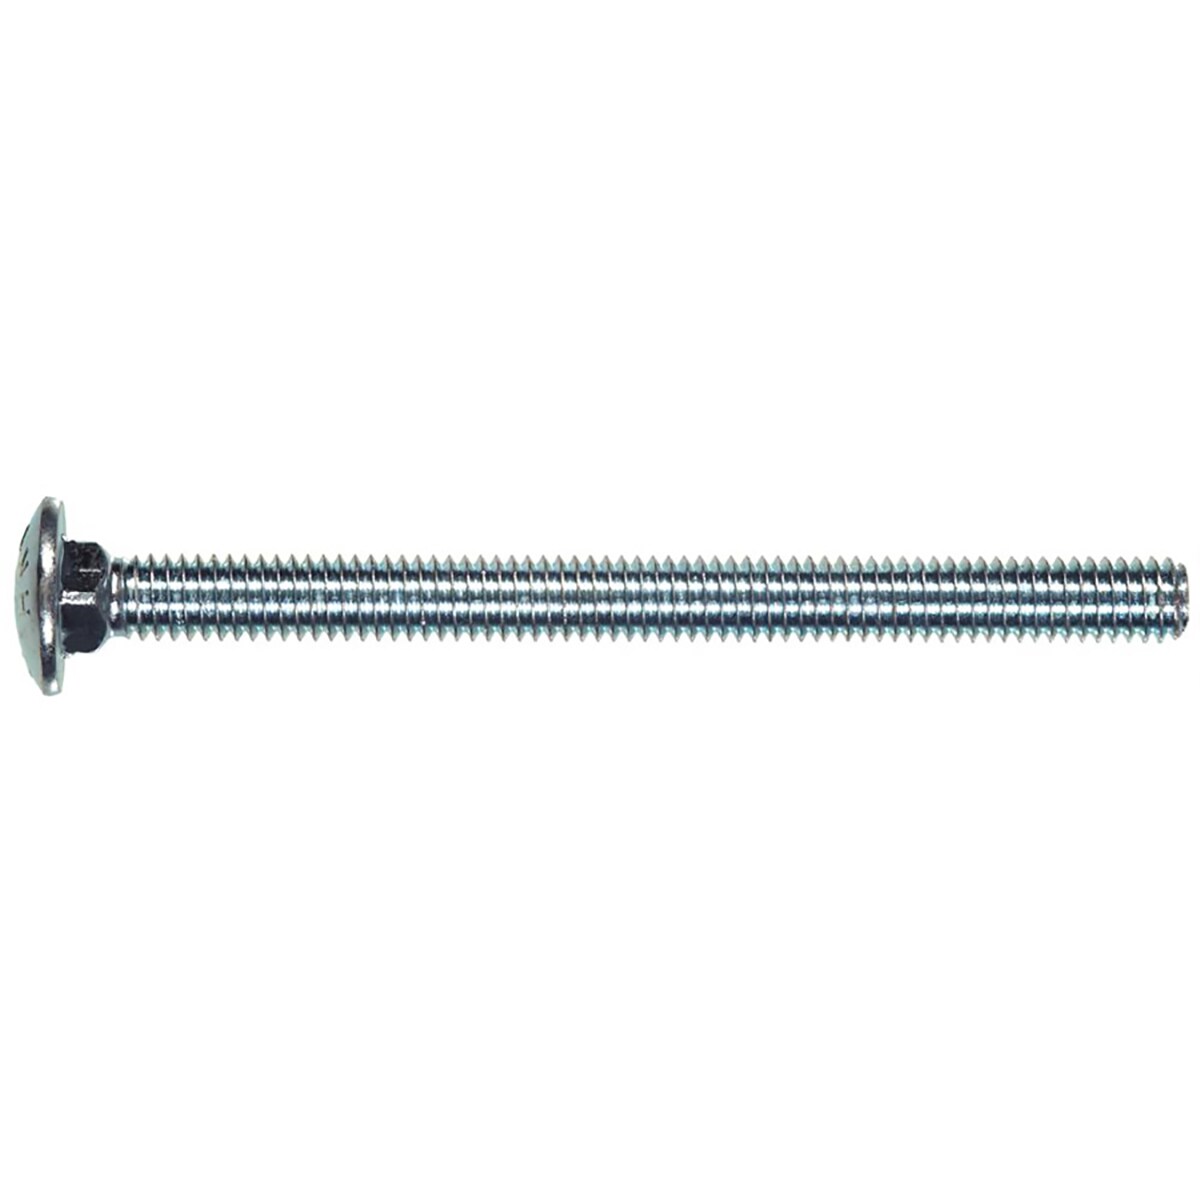 Carriage Bolts 5/16" Anti-Turn Washers Square Shouldered Fasteners Qty 50 